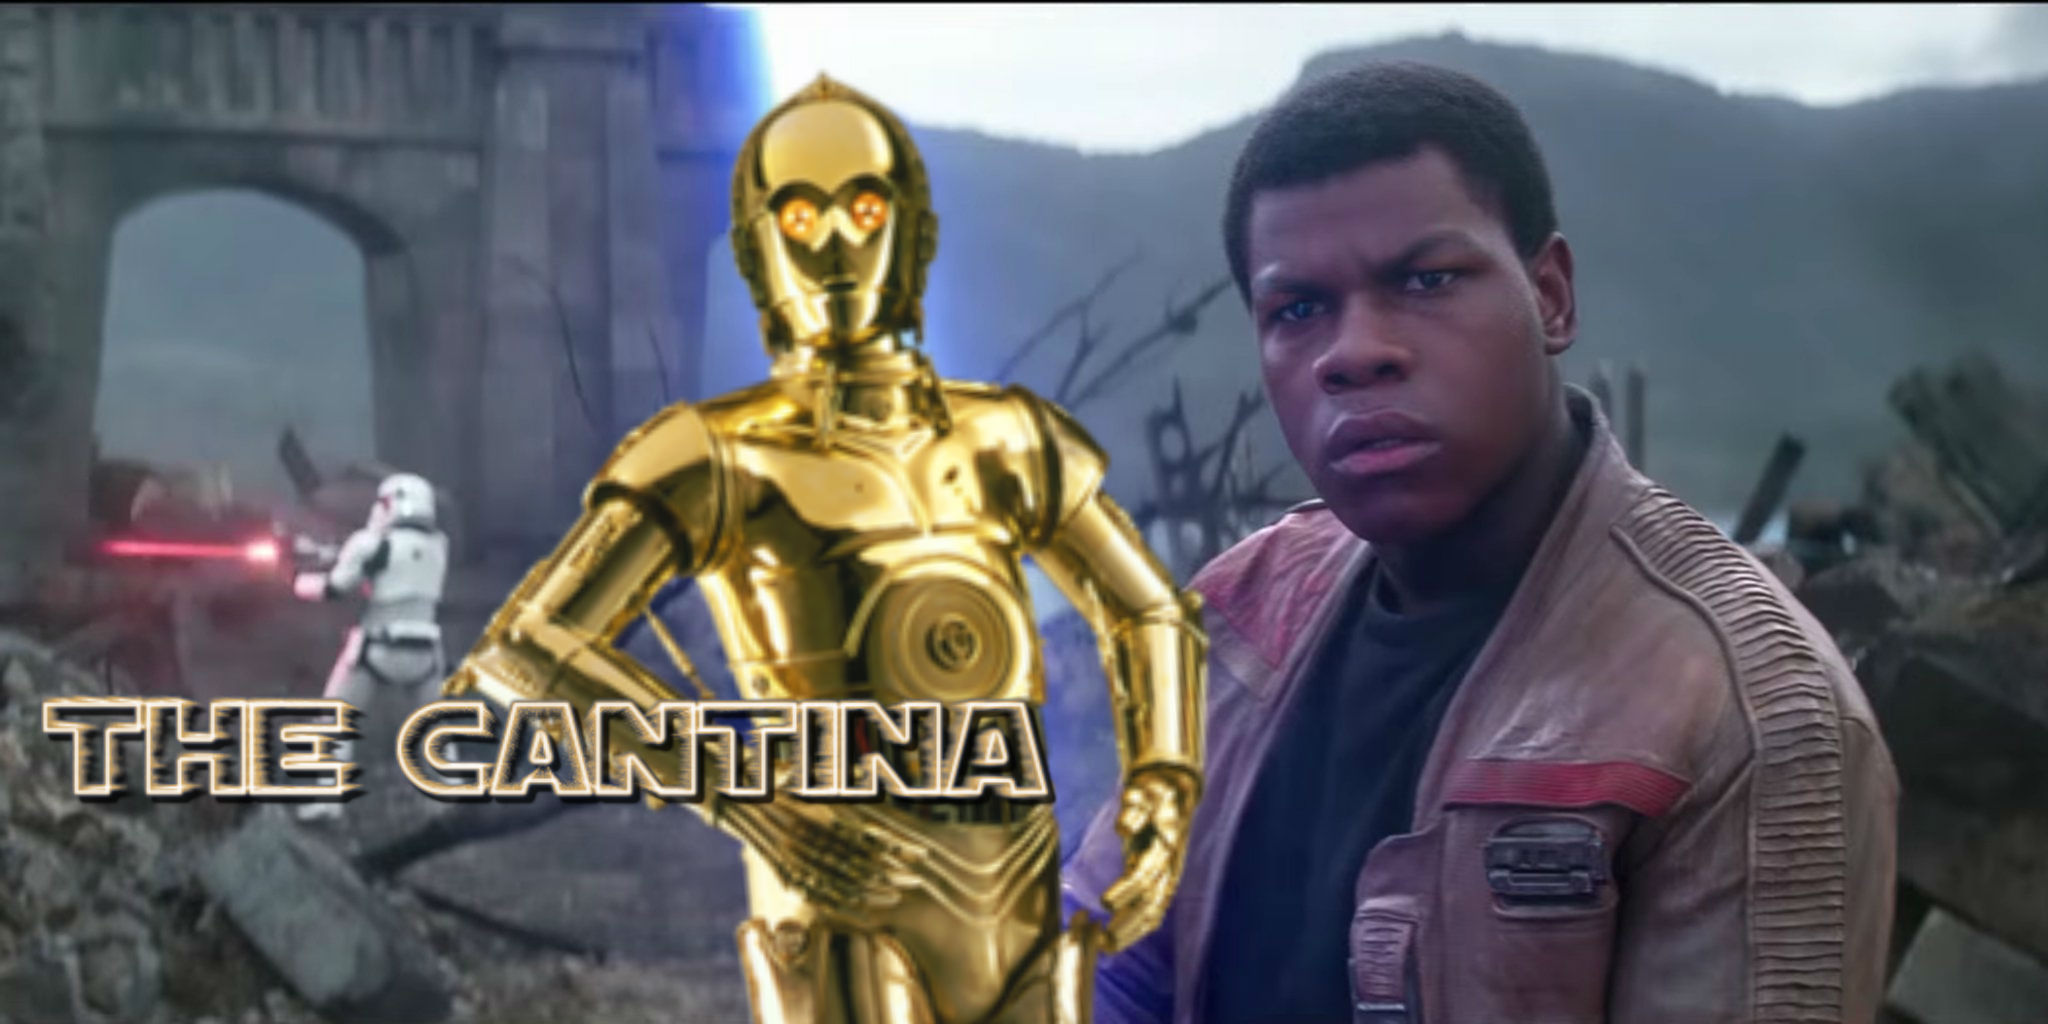 STAR WARS: Finn Starts A Twitter Storm And C-3PO Finishes Filming Episode IX | The Cantina